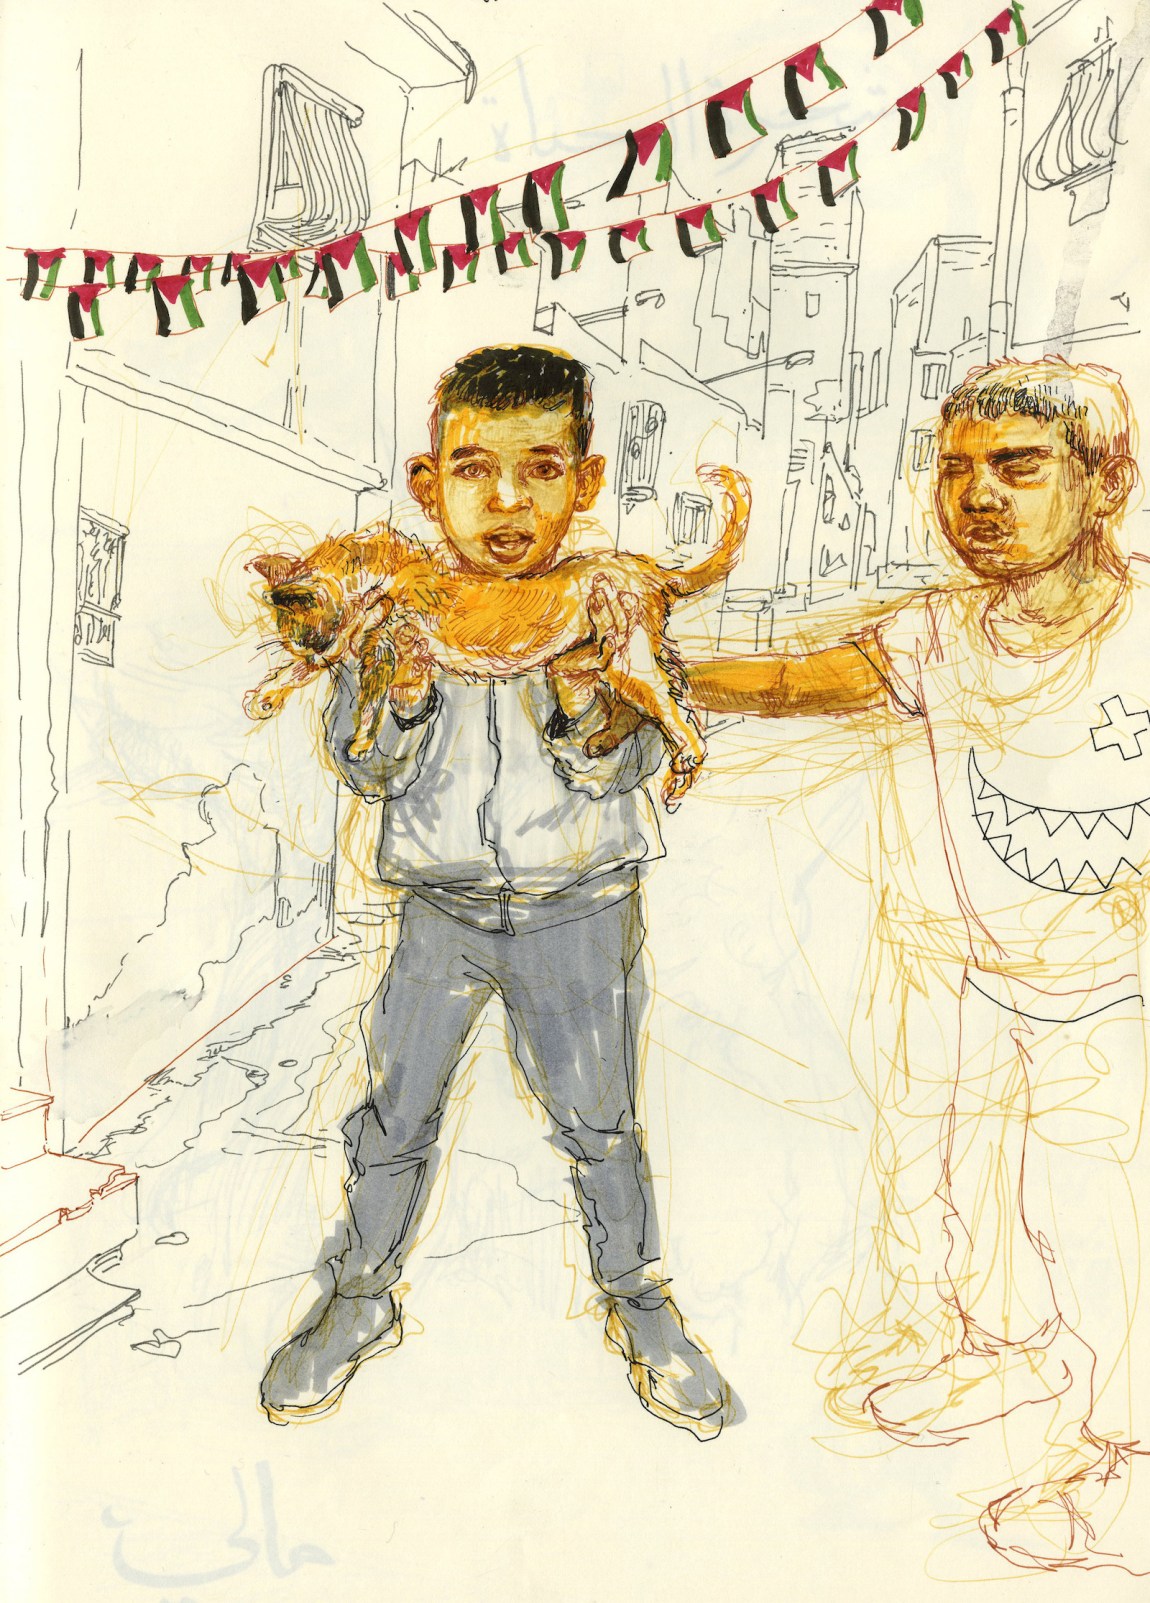 Drawing of two young boys, one holding a cat in his arms, on a street strung with Palestinian flags